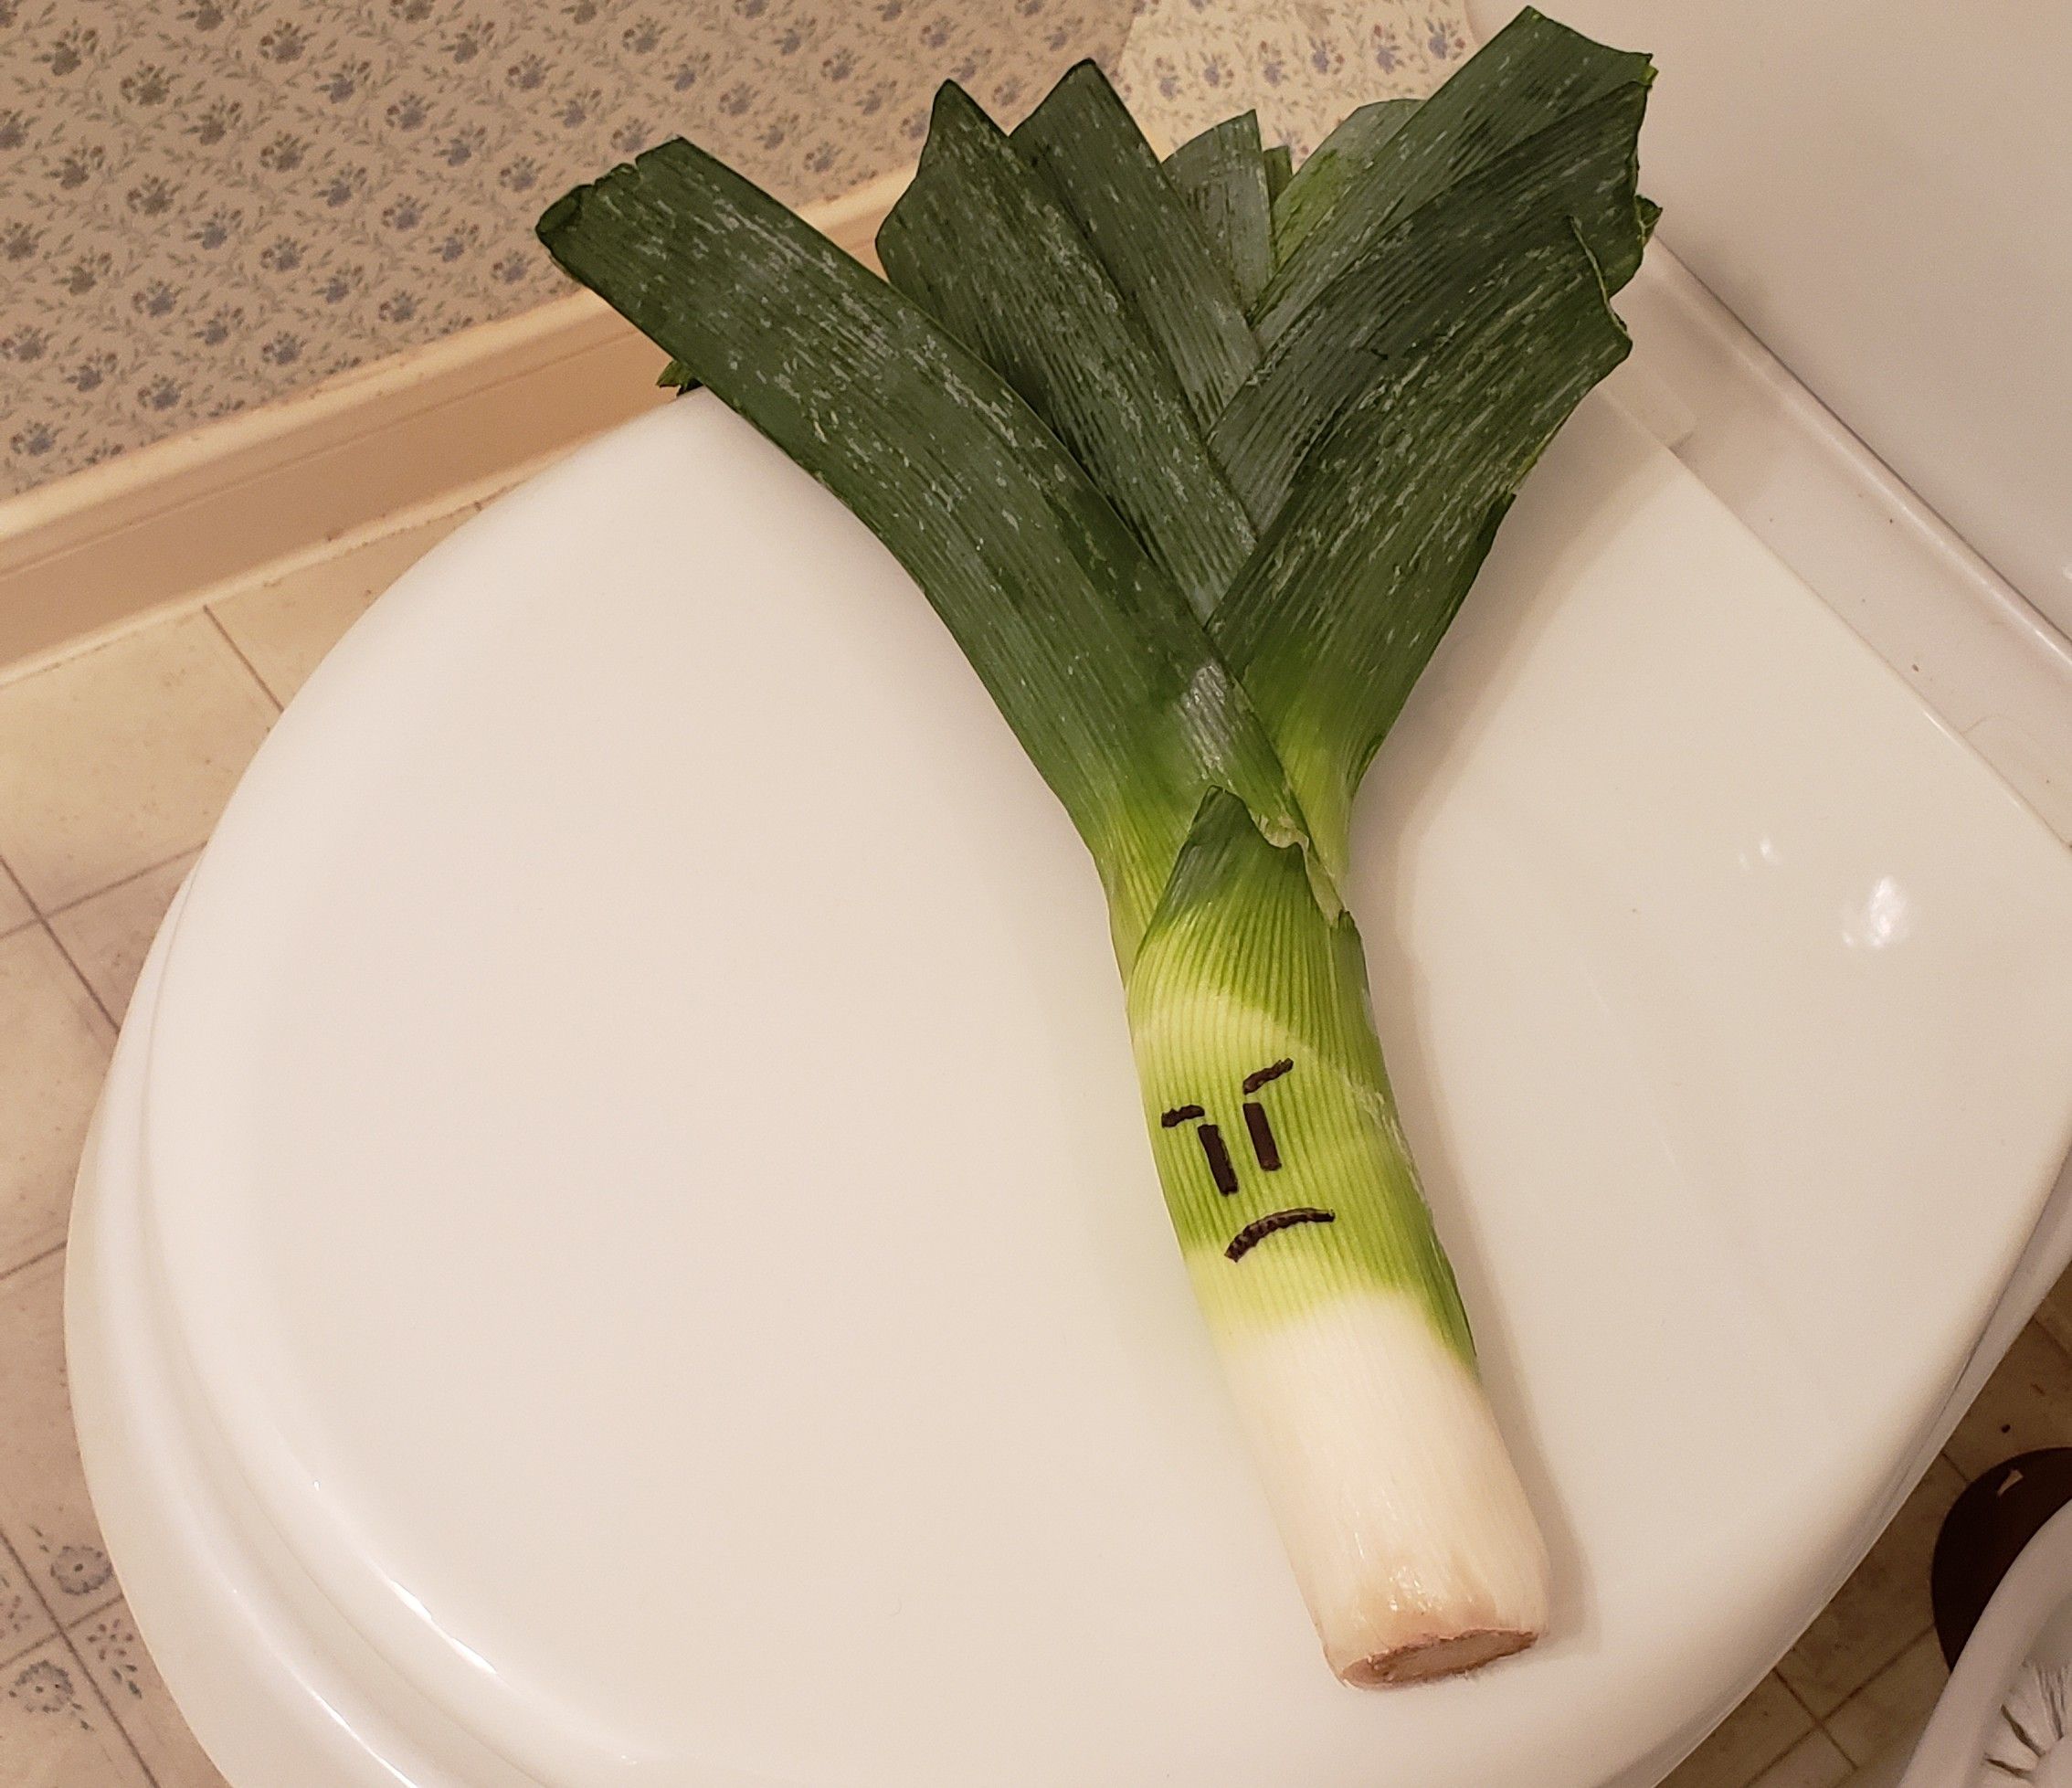 Told my parents there was a serious leak in their bathroom but they were not amused.